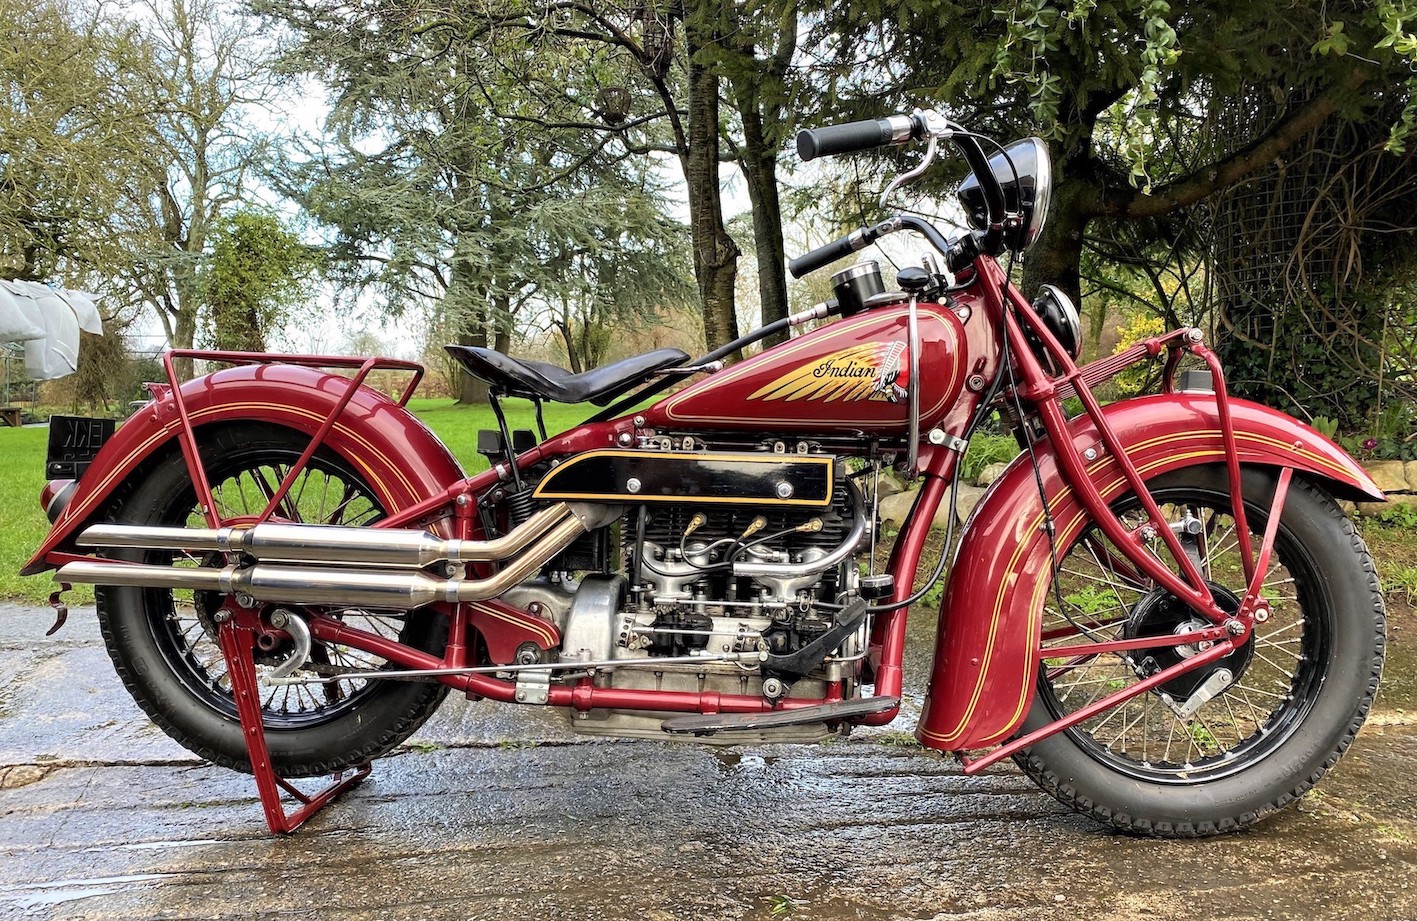 1937 Indian Four 437 sold at auction